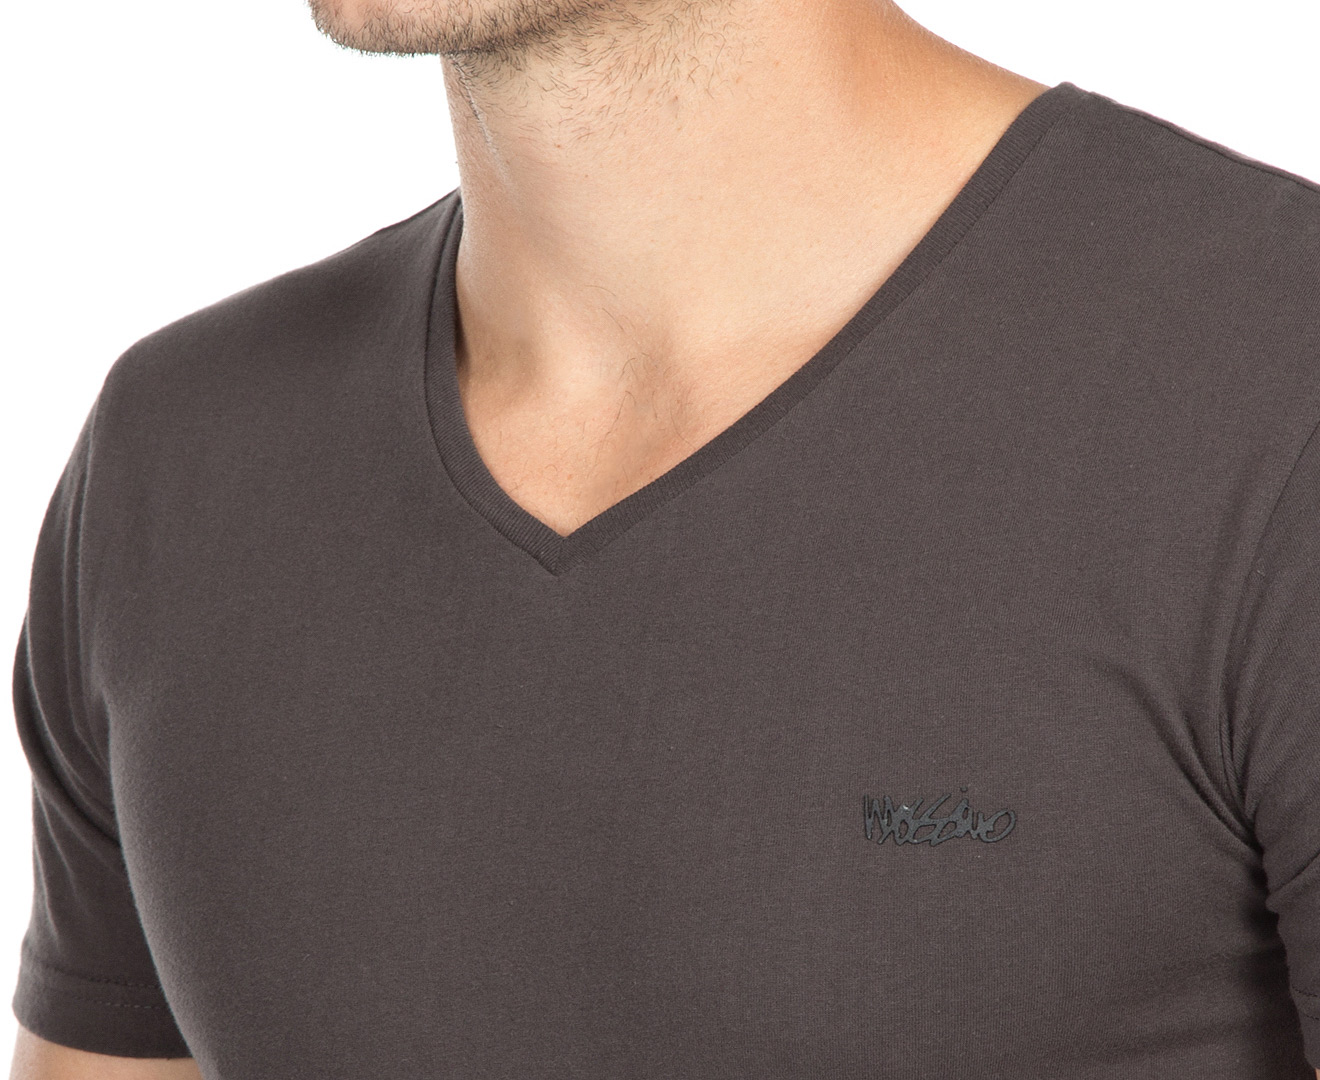 Mossimo Men's Standard Issue V-Neck Tee - Vintage Black | Great daily ...